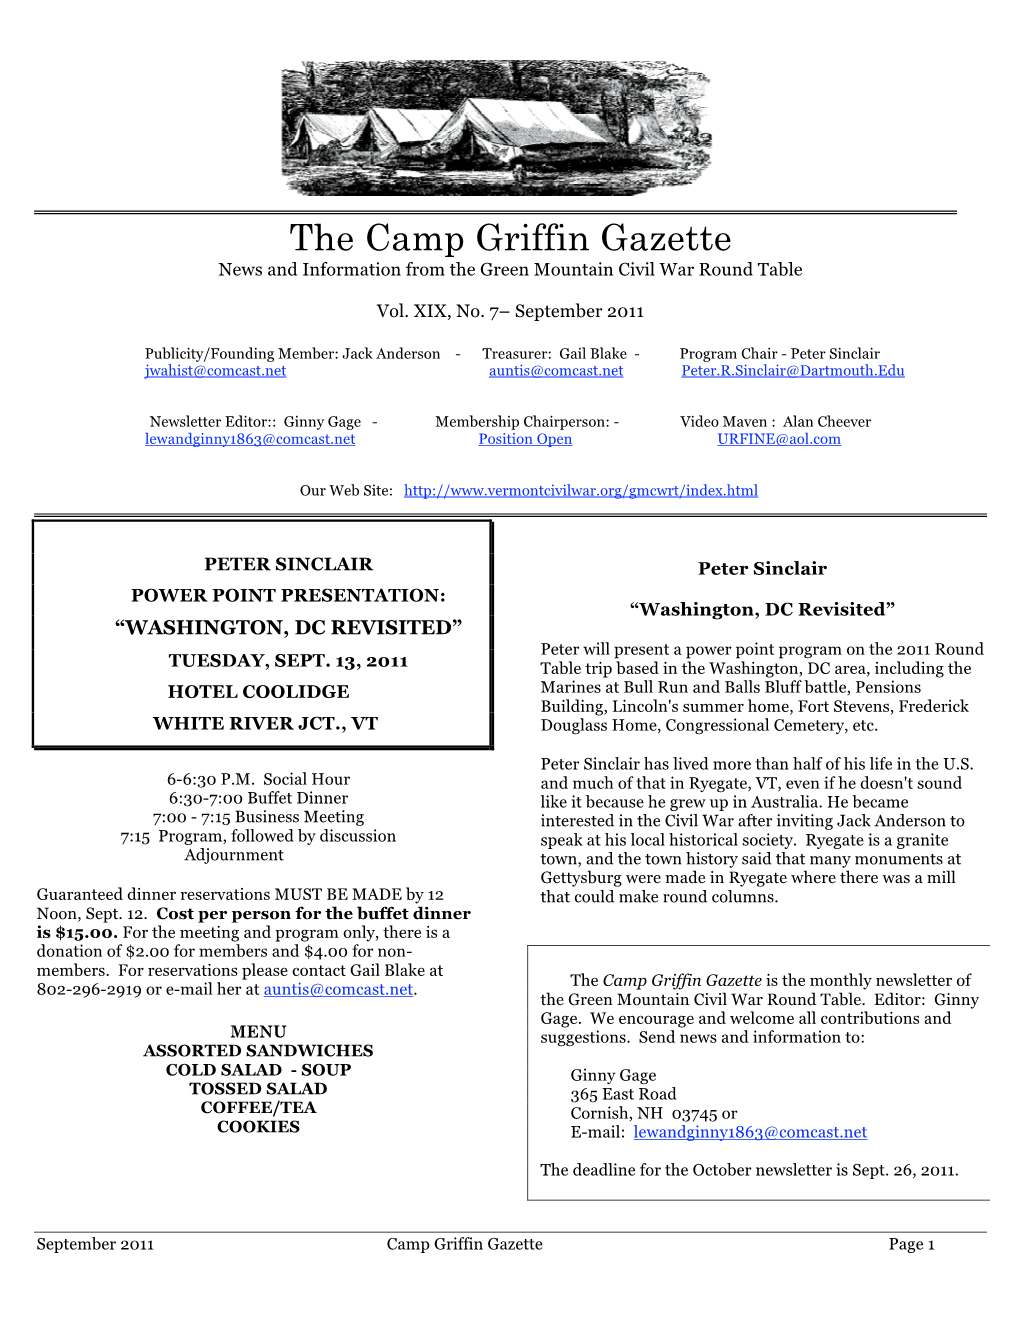 Camp Griffin Gazette News and Information from the Green Mountain Civil War Round Table